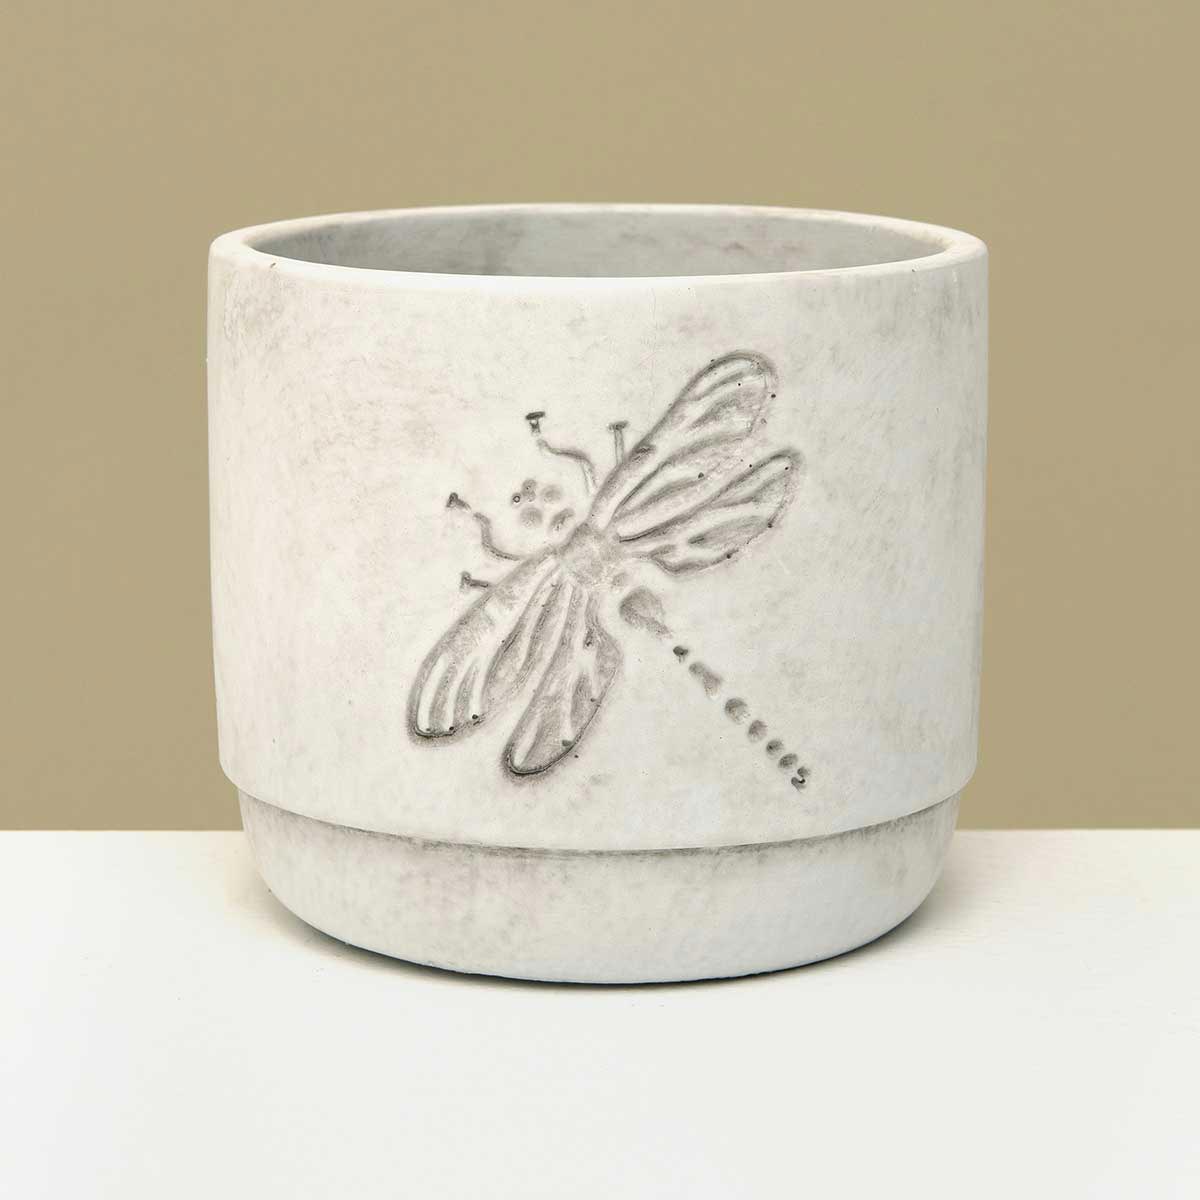 POT DRAGONFLY WHITE WASH SMALL 4.75IN X 4IN CONCRETE